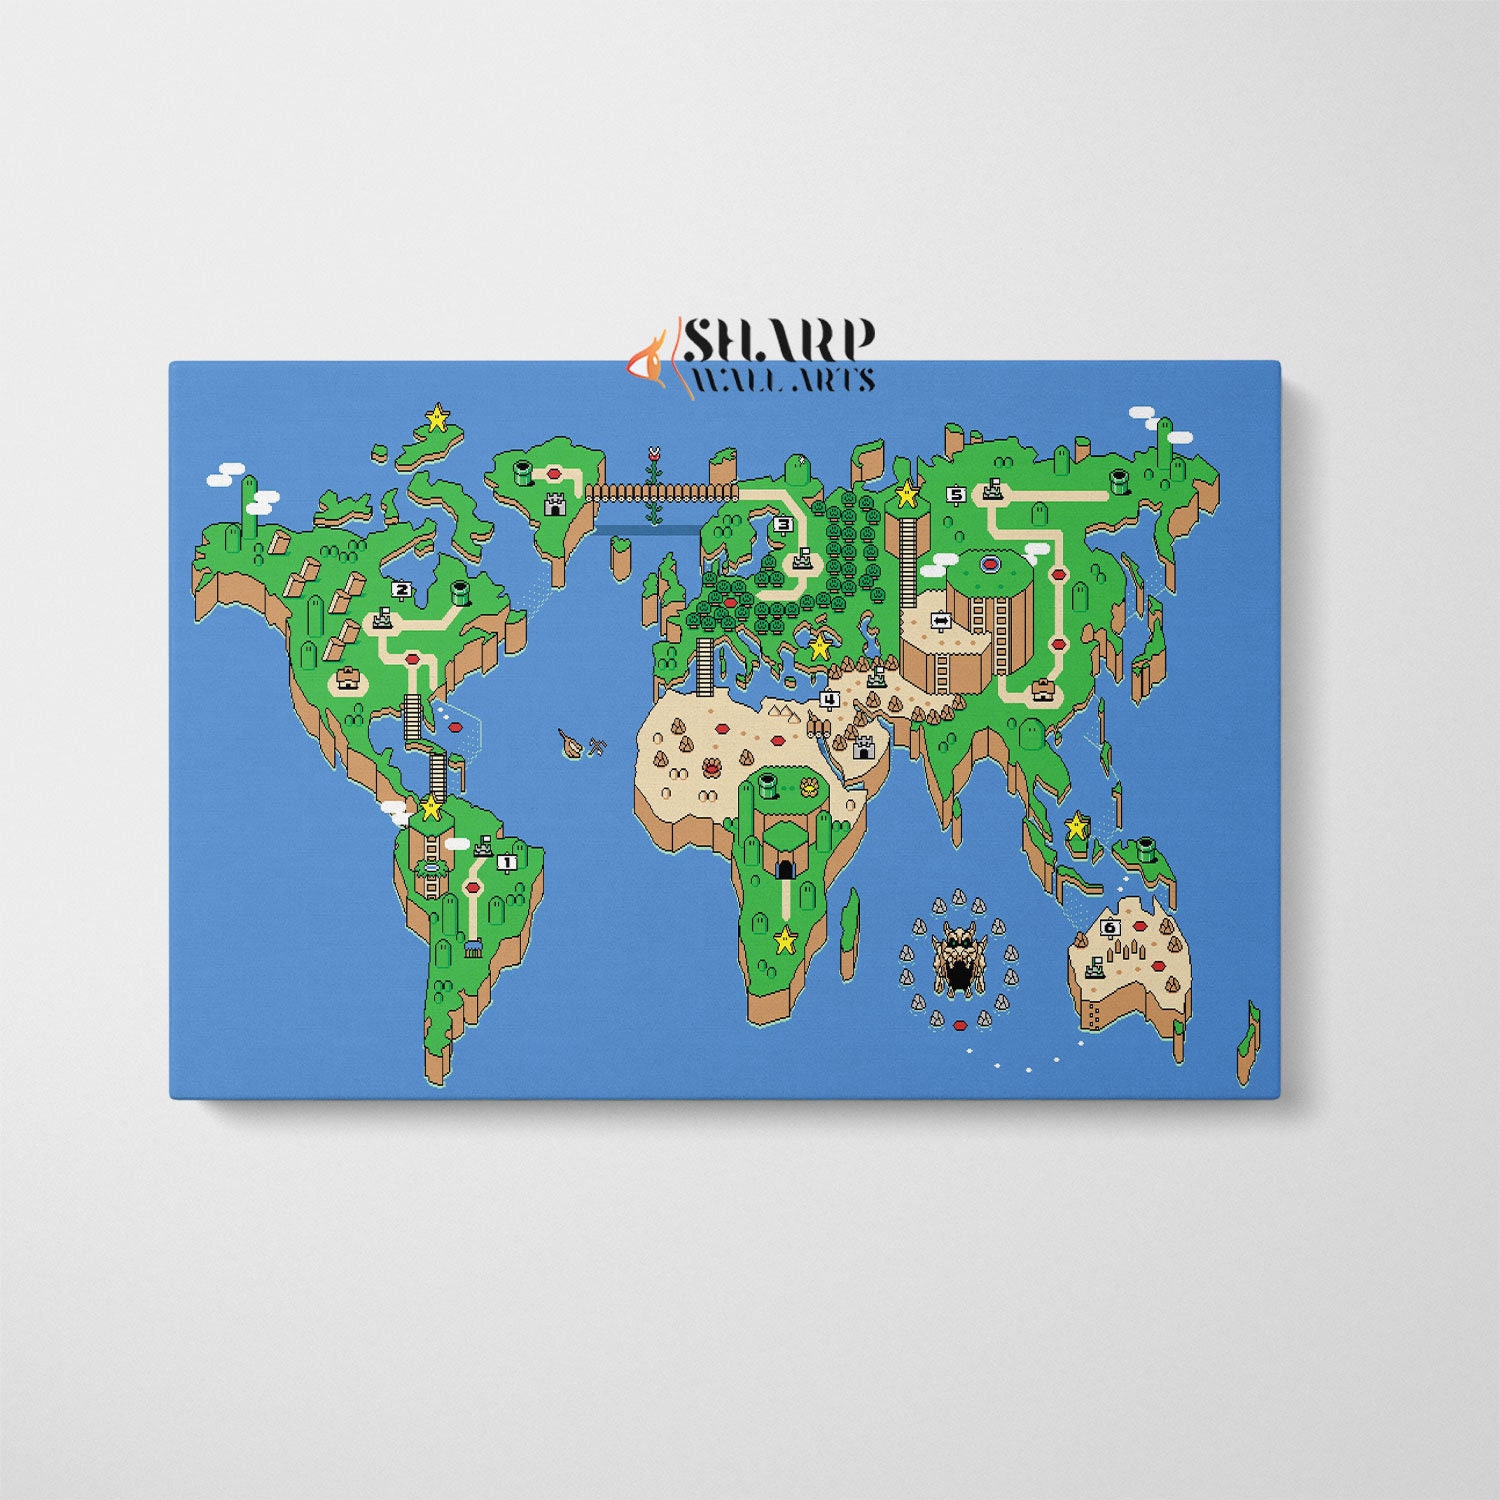 Super Mario World style map of the Earth : r/retrogaming